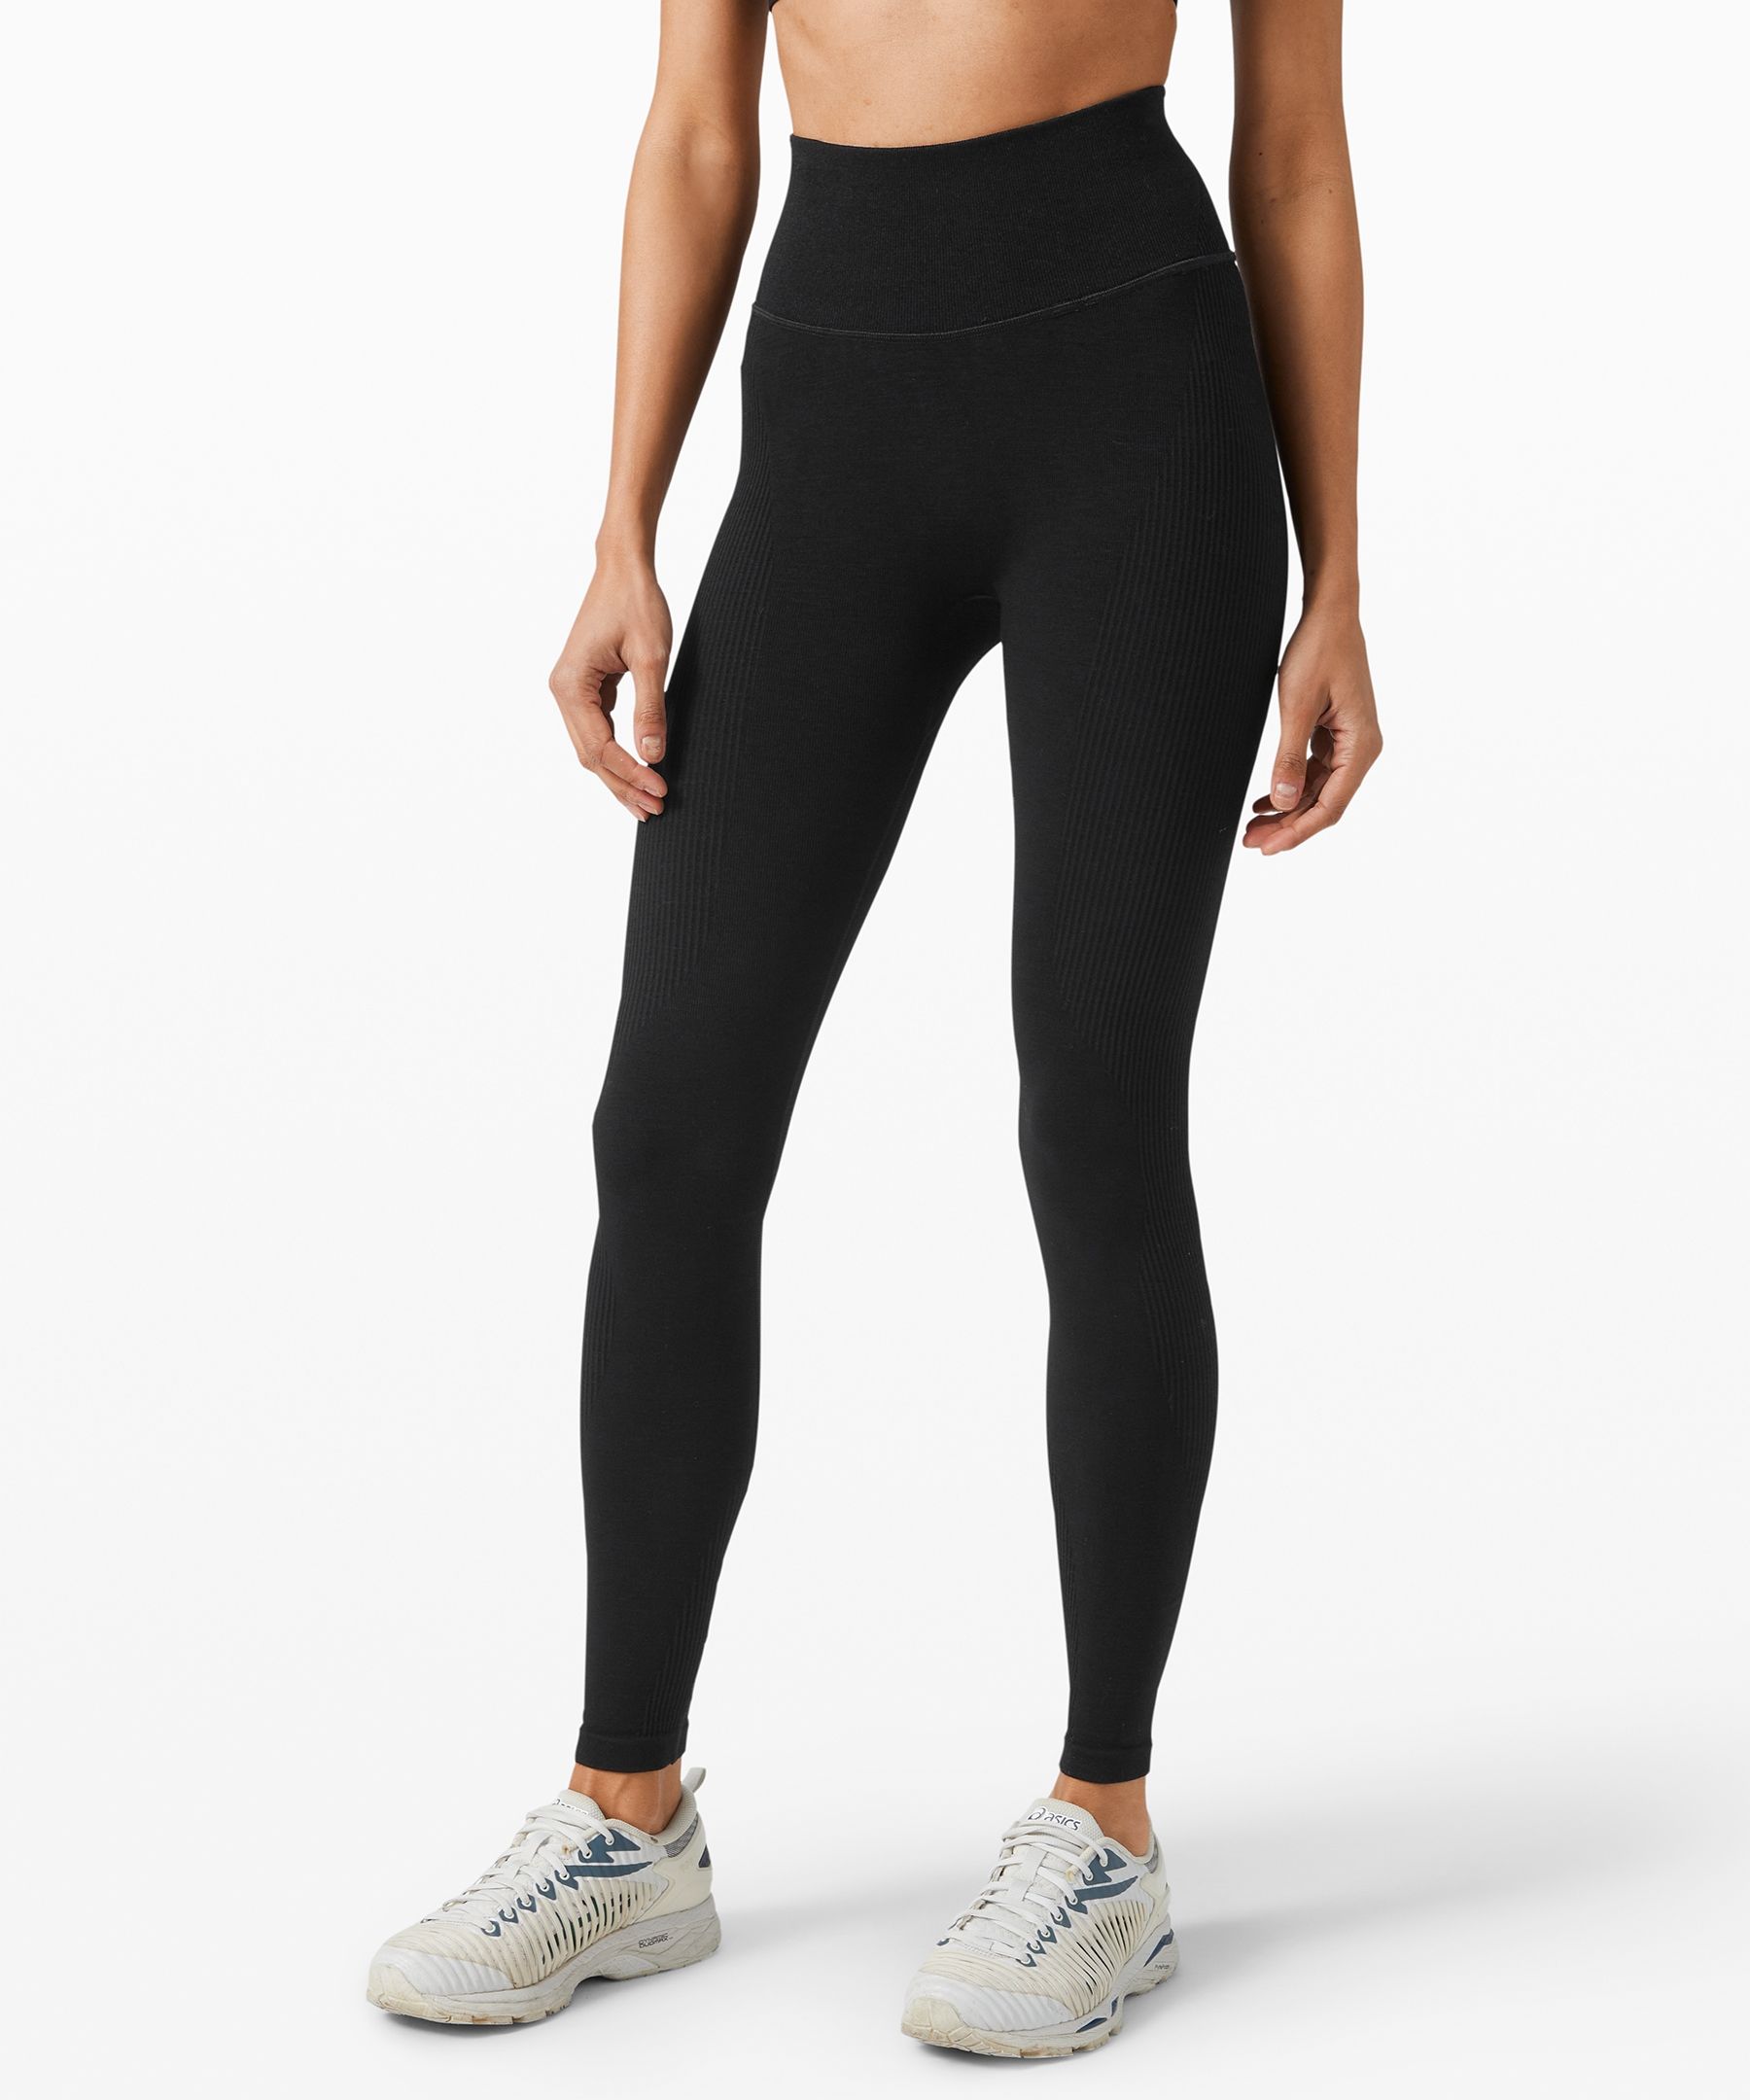 Lululemon Fast and Free Tights Review - Agent Athletica